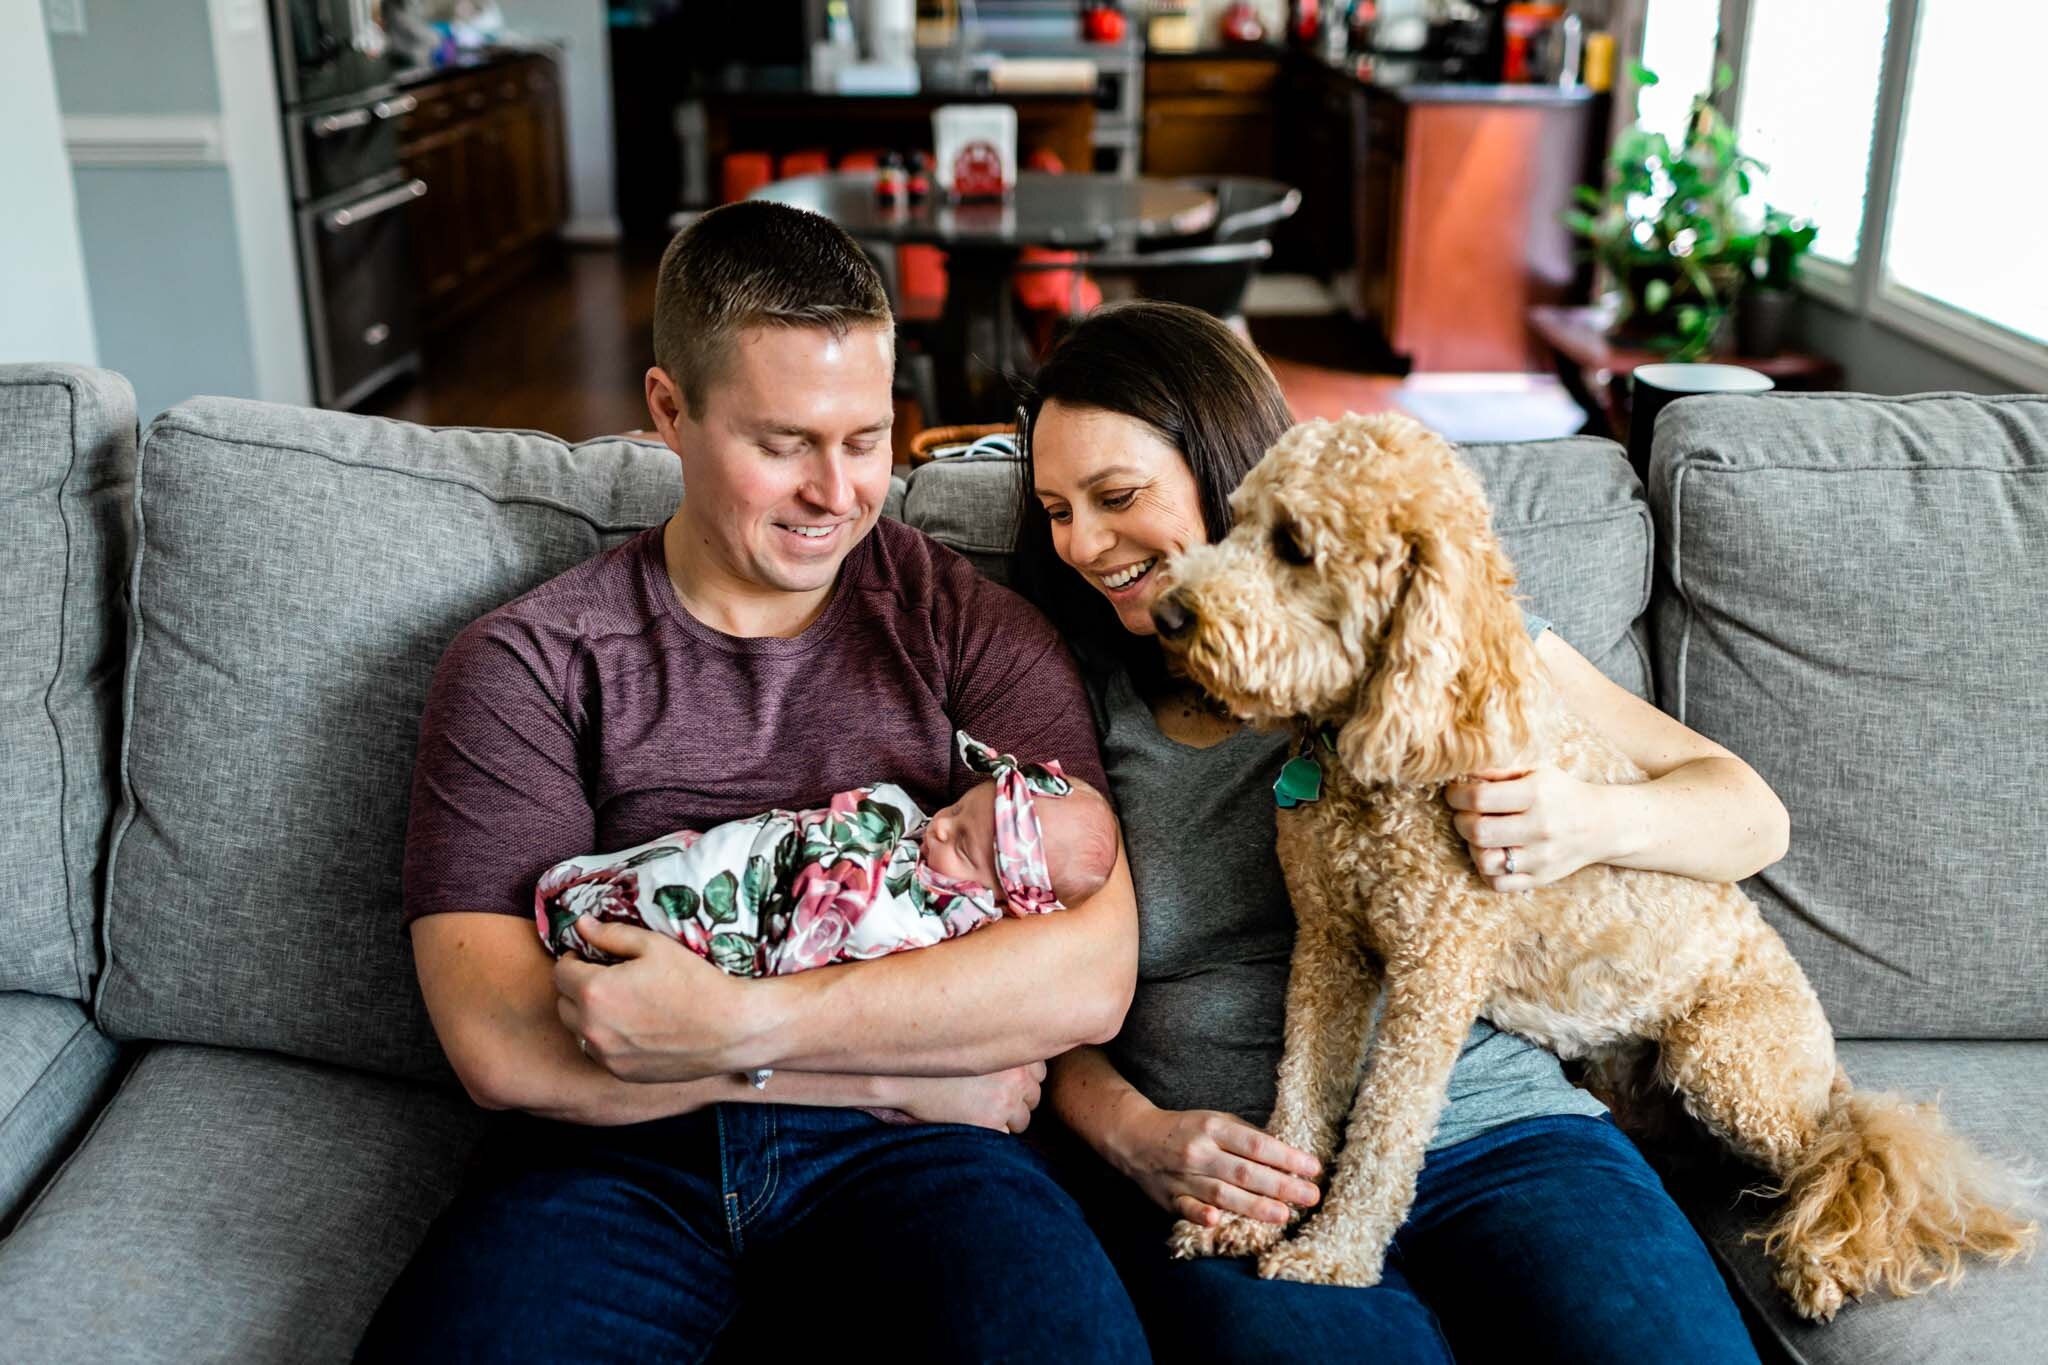 Hillsborough Newborn Photographer | By G. Lin Photography | Family sitting on couch with baby and dog